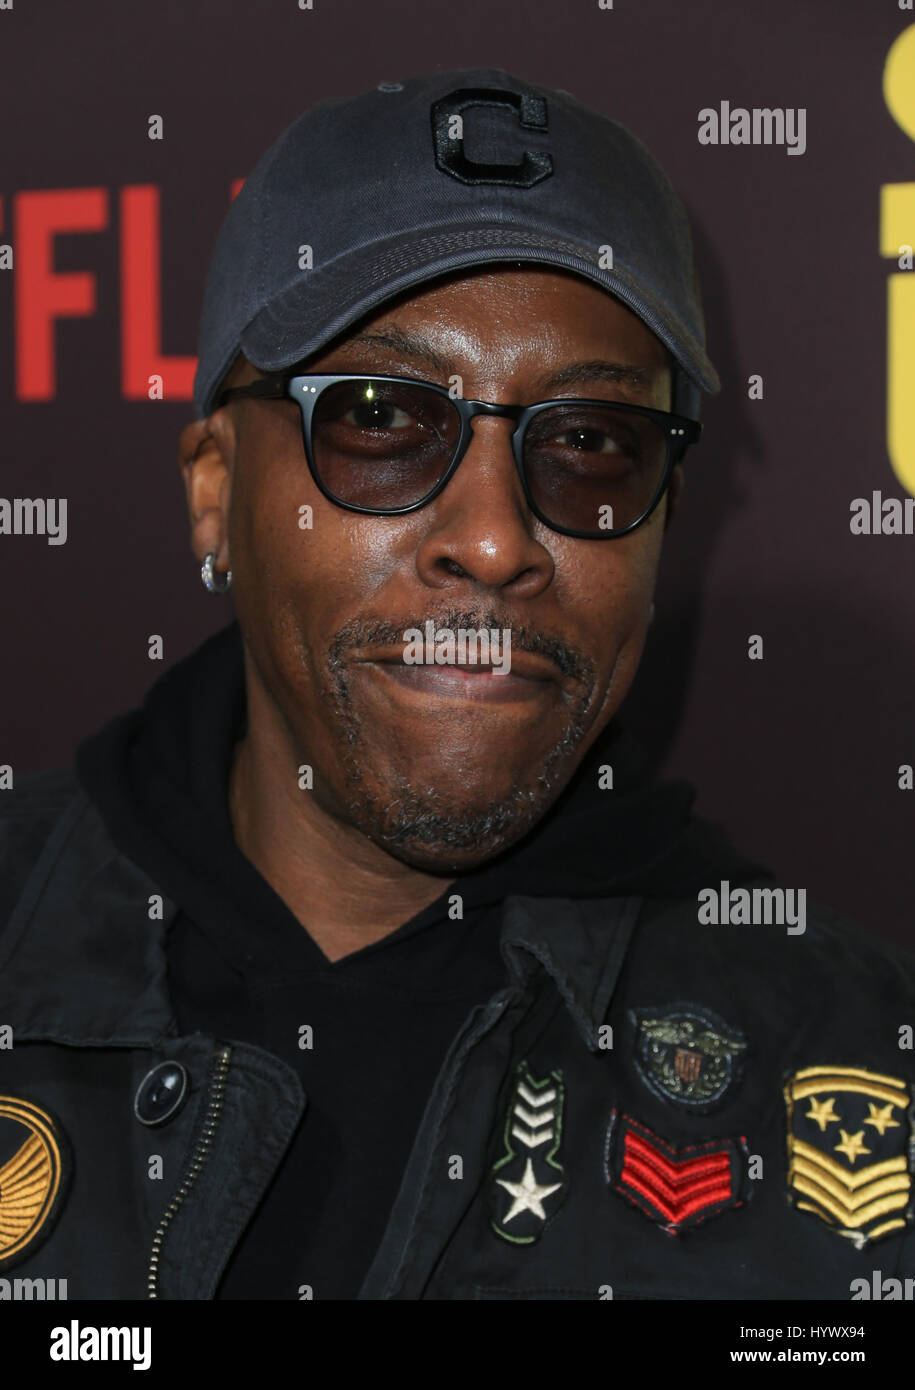 Hollywood, USA. 06th Apr, 2017. Arsenio Hall, at Premiere of Netflix's 'Sandy Wexler at The ArcLight Cinemas Cinerama Dome in California on April 06, 2017. Credit: Fs/Media Punch/Alamy Live News Stock Photo